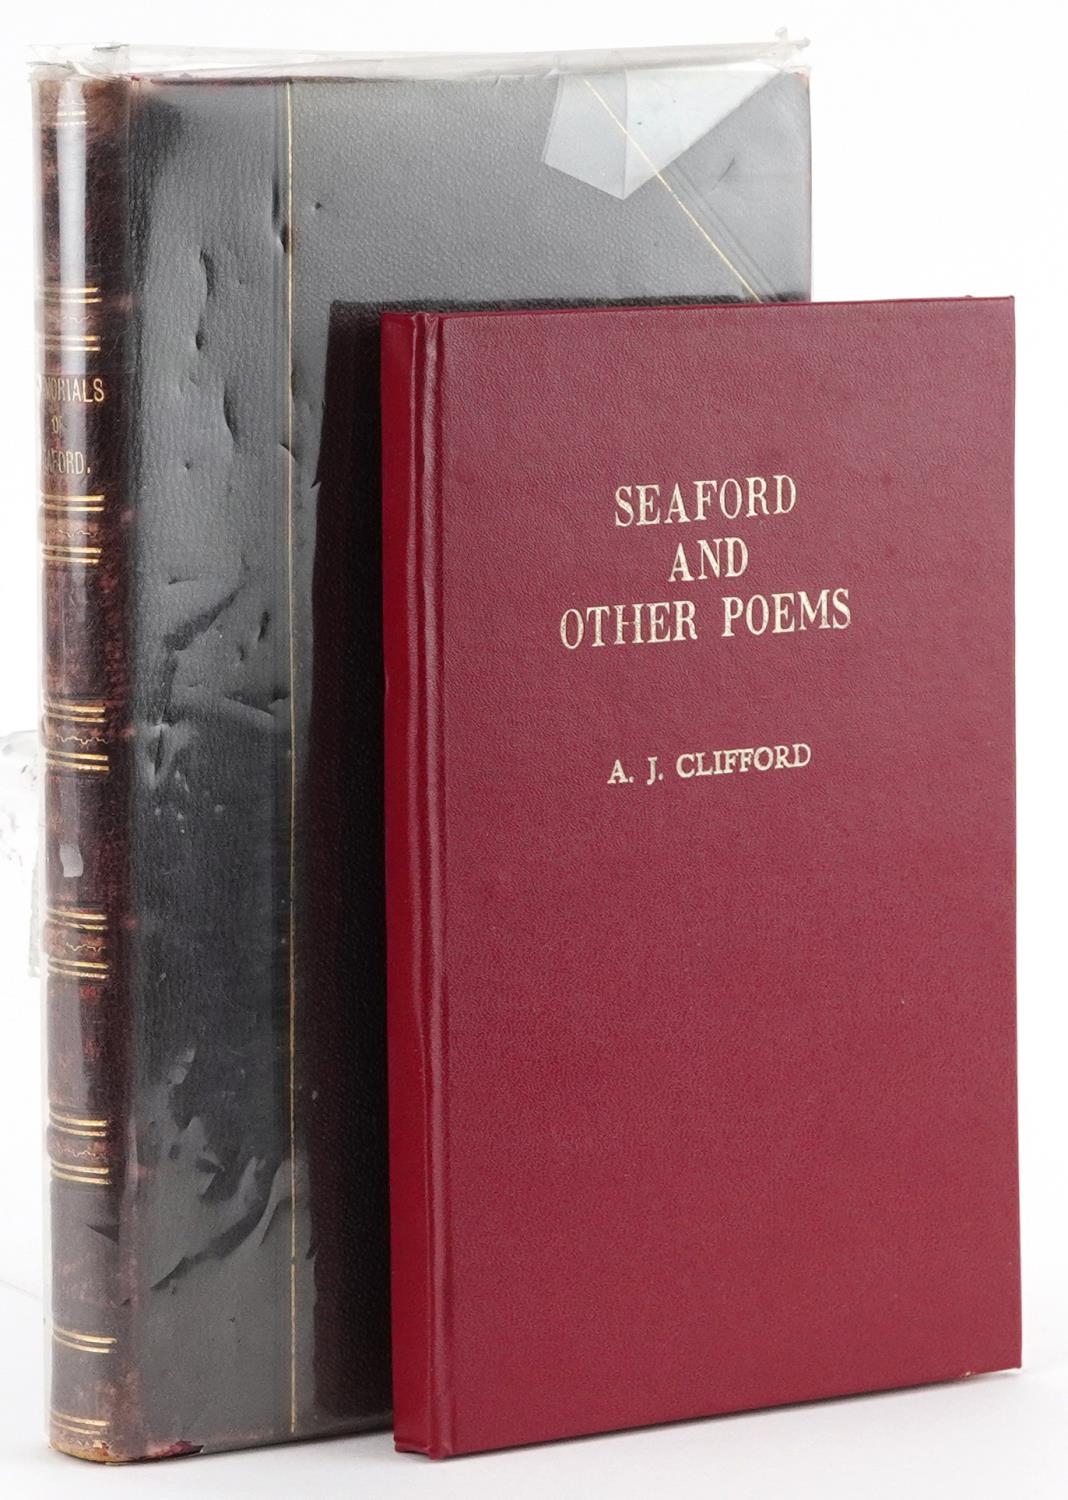 Two local interest hardback books relating to Seaford comprising Memorials of the Town, Parish and